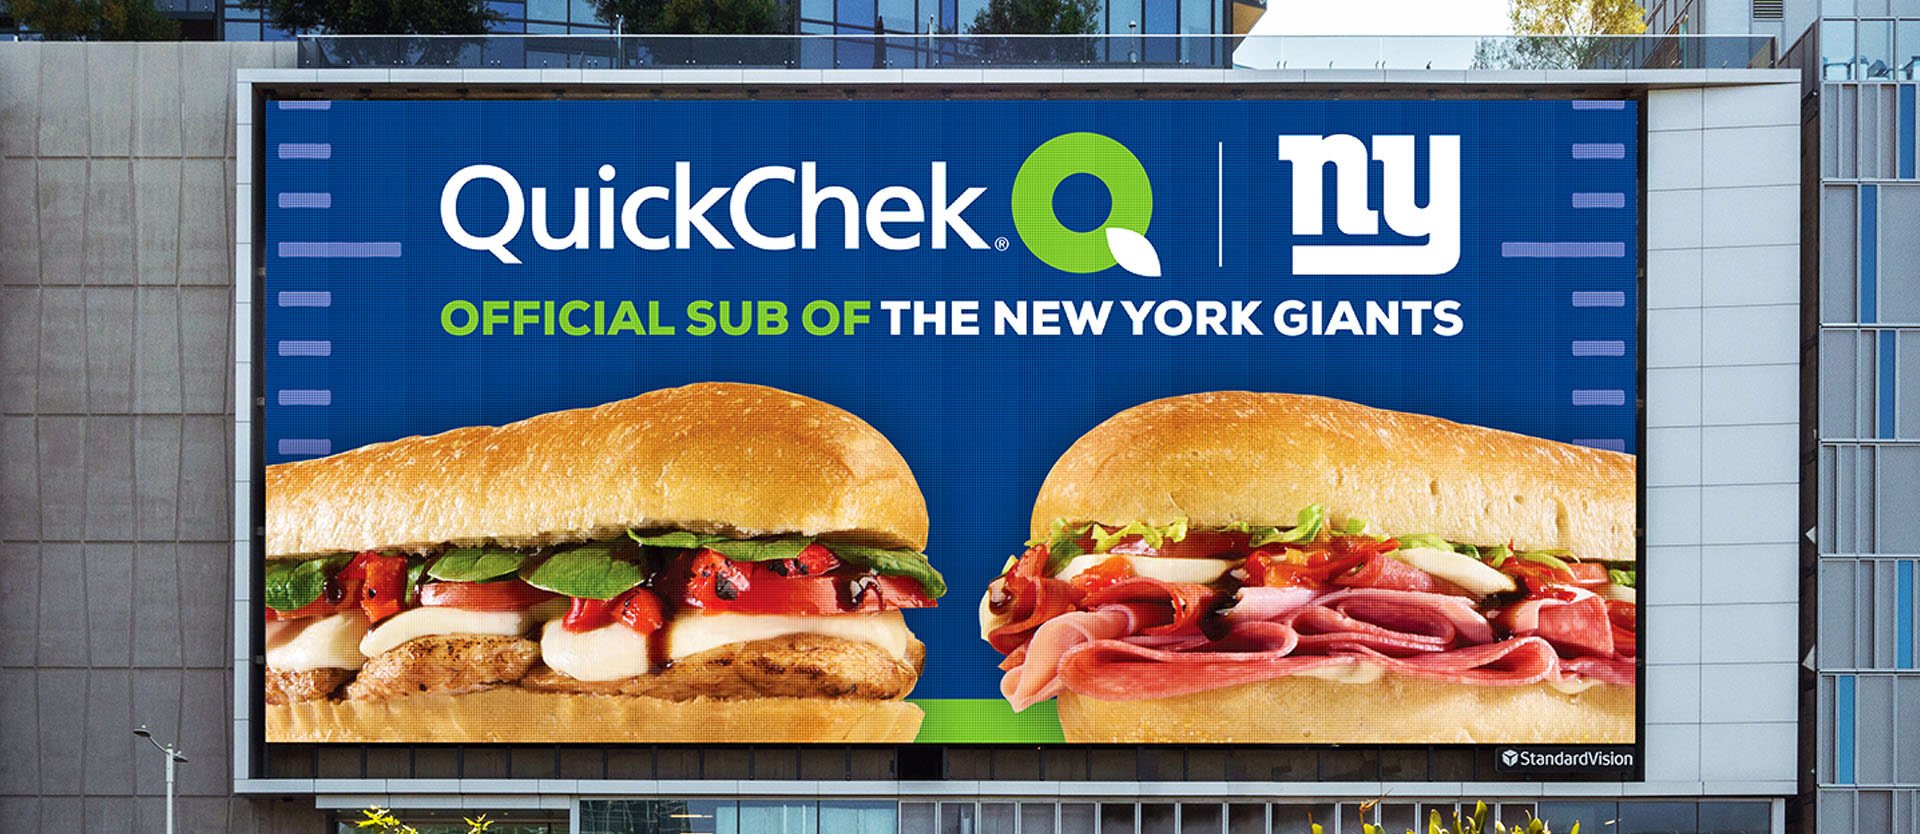 Out of Home Advertising - QuickChek: The Official Sub of The New York Giants Billboard